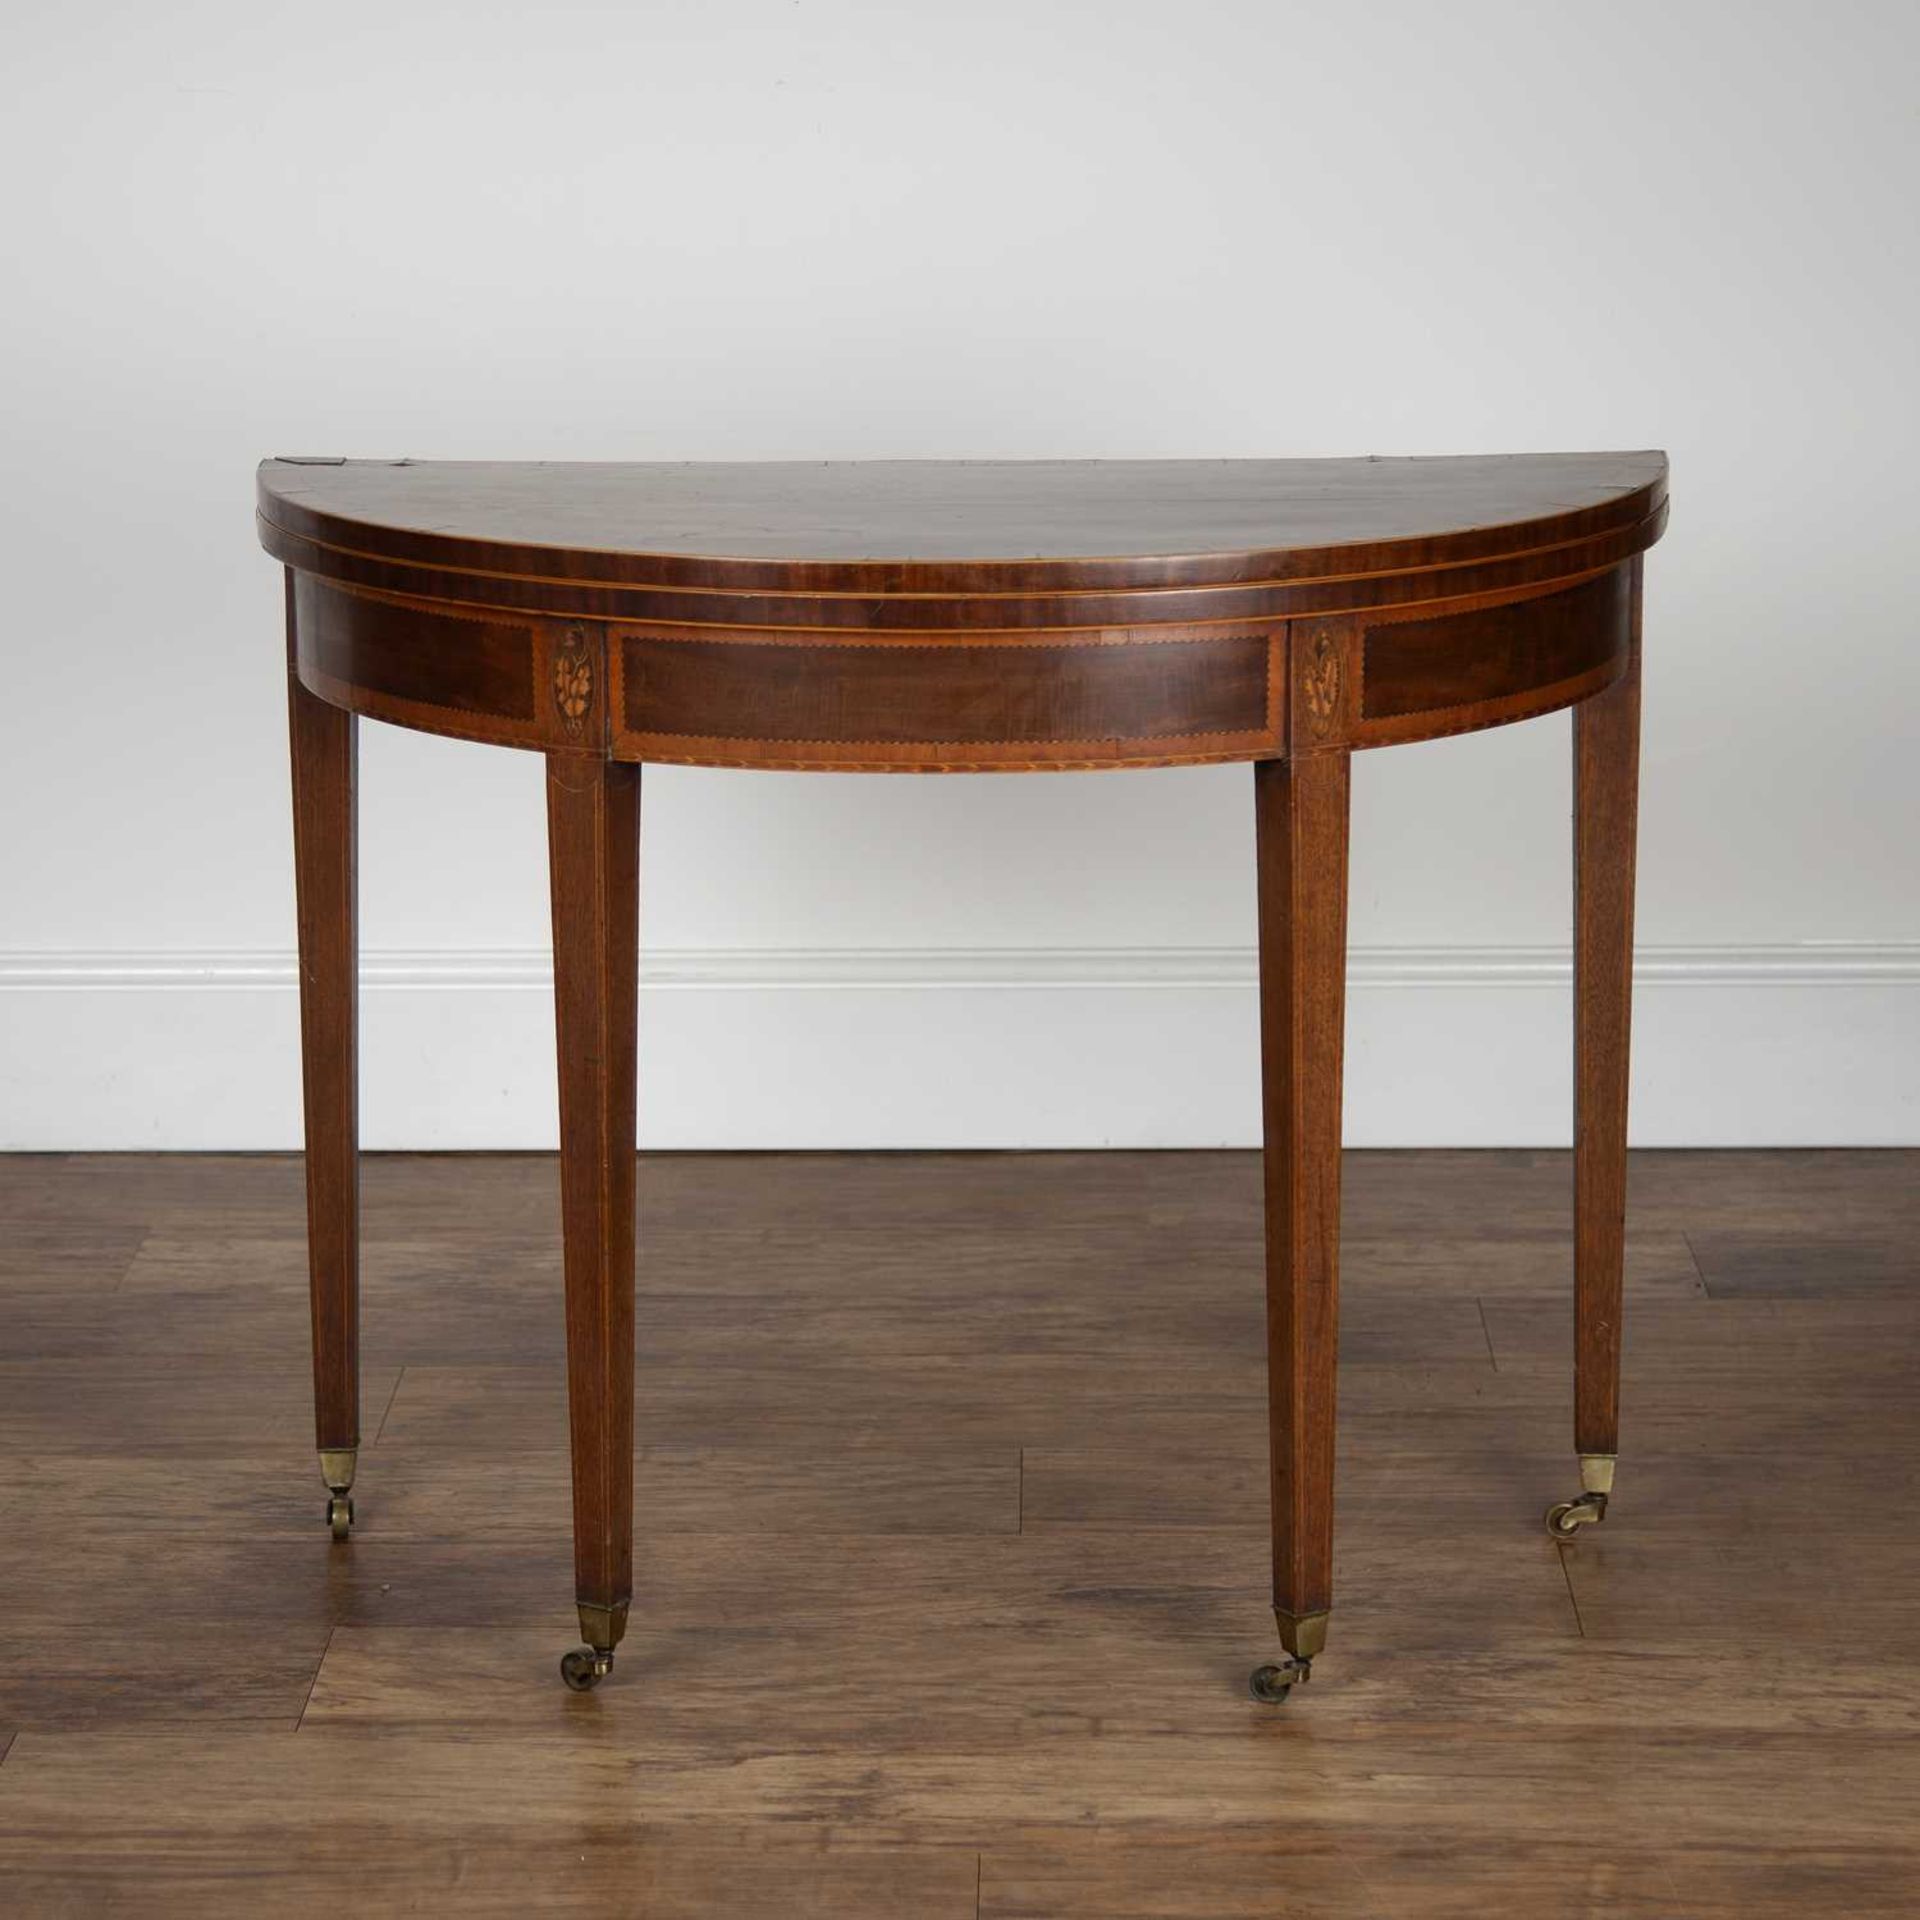 Mahogany marquetry inlaid card table George III, with fold over top and green baize lining, on